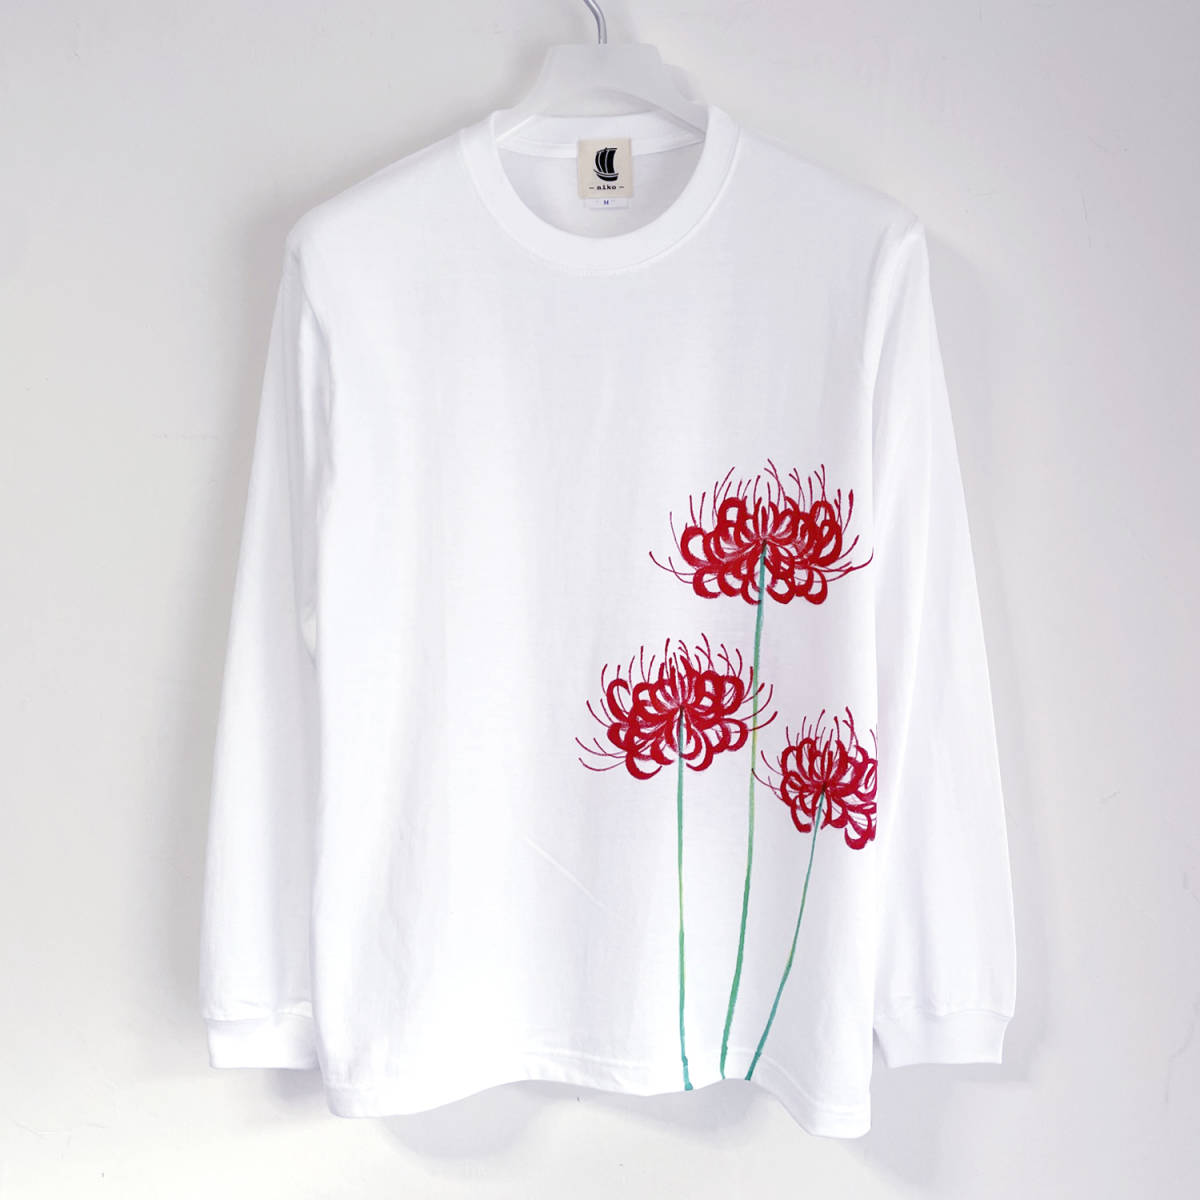 Higan floral pattern T-shirt, white S size, hand-painted long sleeve T-shirt with ribbed sleeves, long T-shirt, floral pattern, Japanese pattern, white, T-shirt, long sleeve, S size